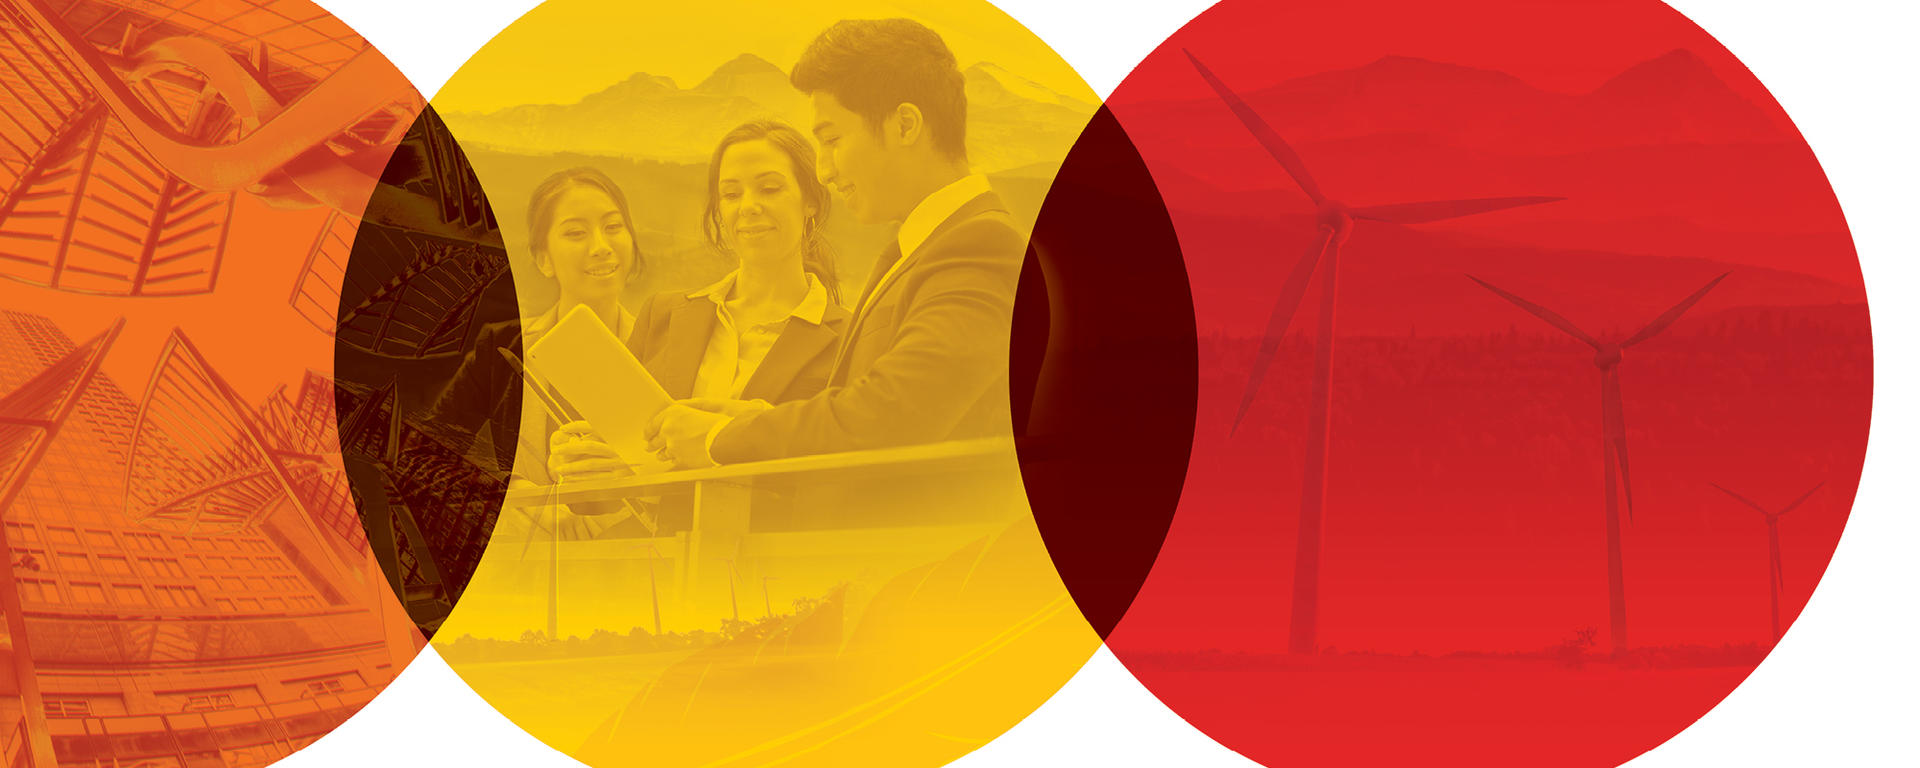 An orange circle with a picture of downtown Calgary, a yellow circle with three people looking at a document, a red circle with wind turbines against a mountain background